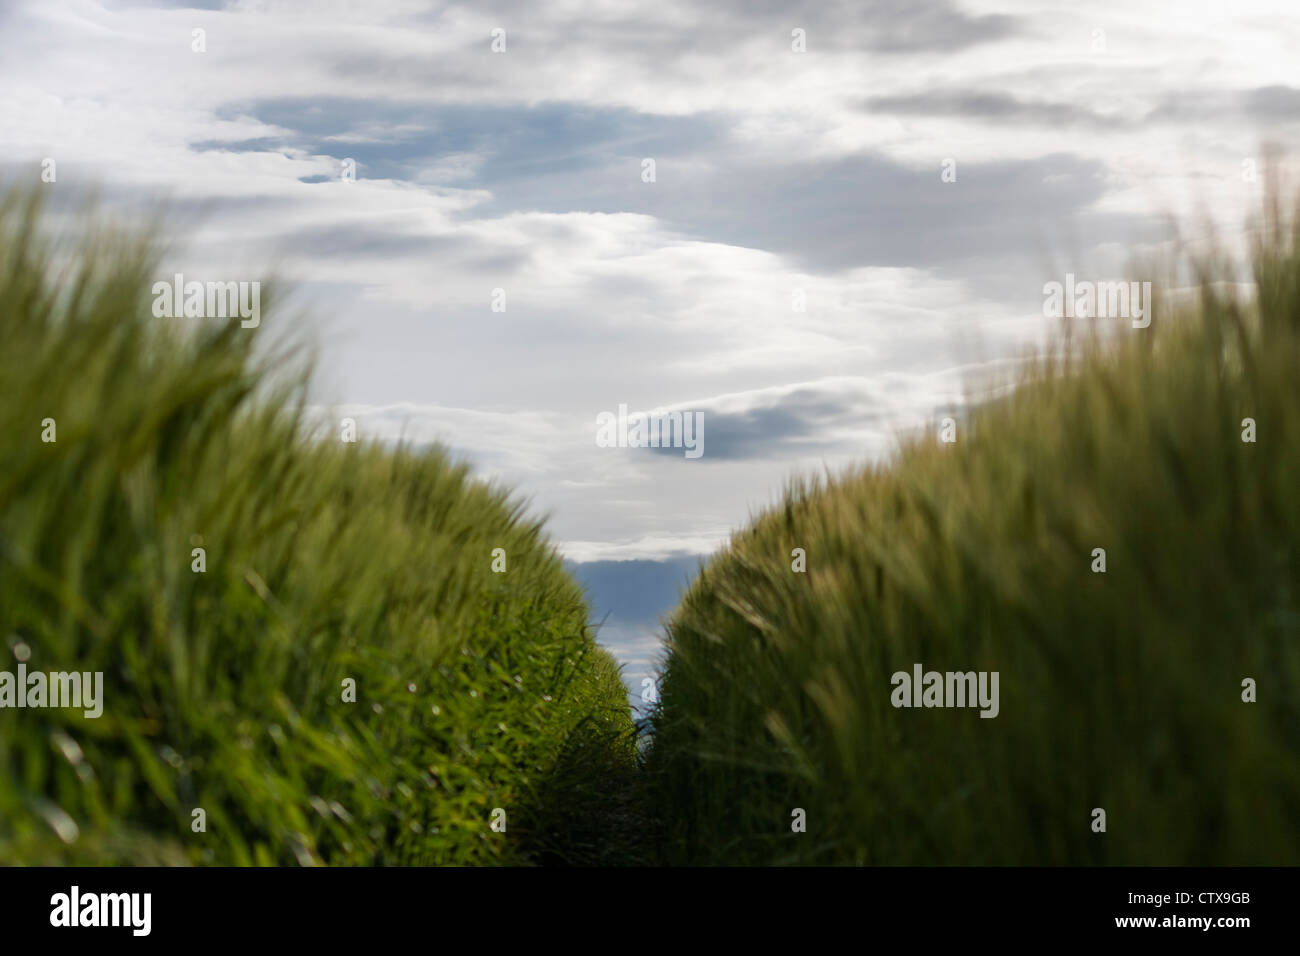 Low view of a path made through a crop field. Stock Photo